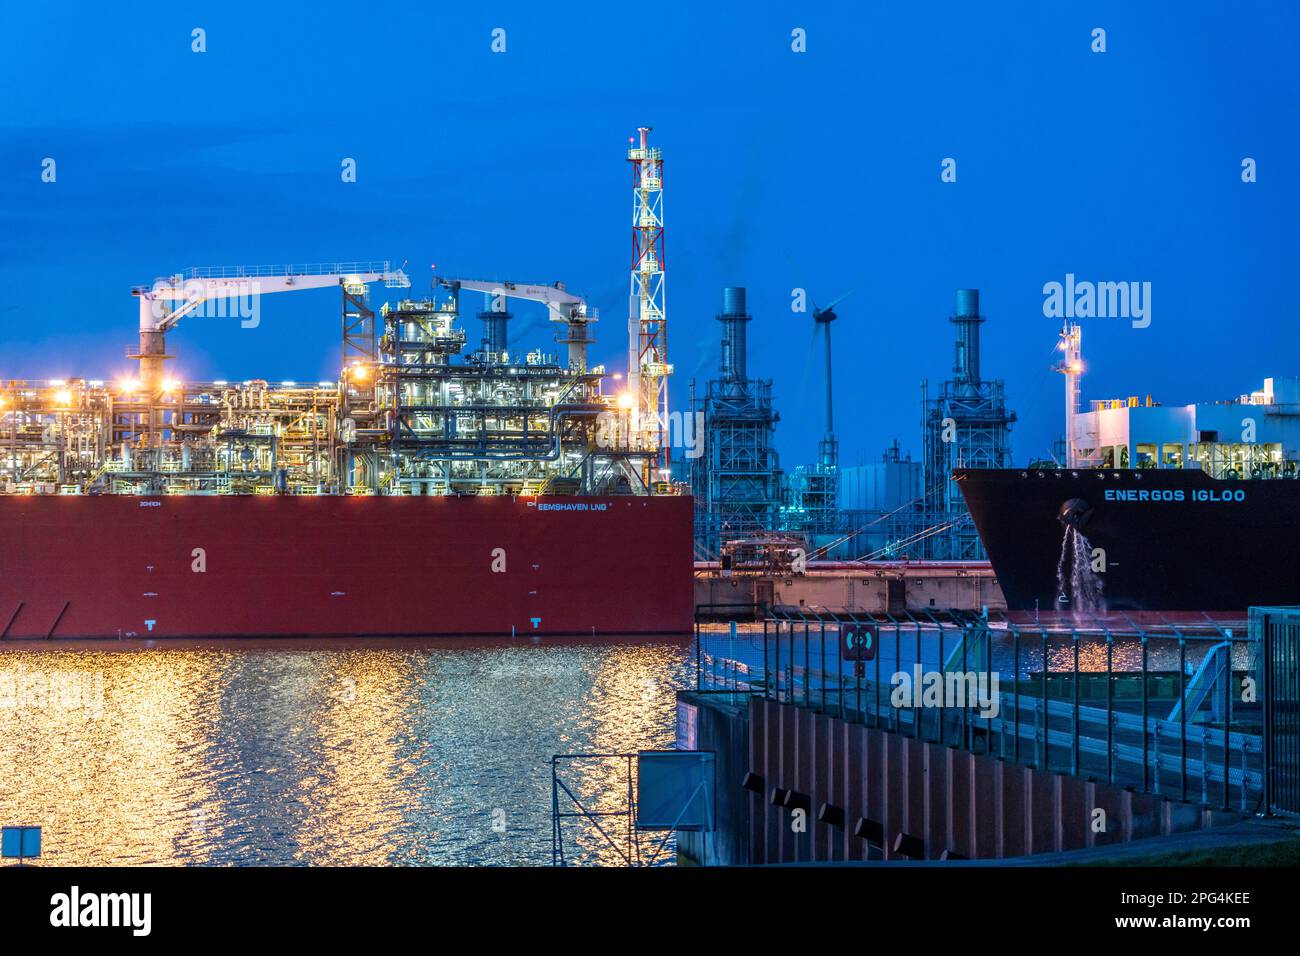 EemsEnergyTerminal, floating LNG terminal in the seaport of Eemshaven, tankers bring liquefied natural gas to the two production ships, Eemshaven LNG Stock Photo